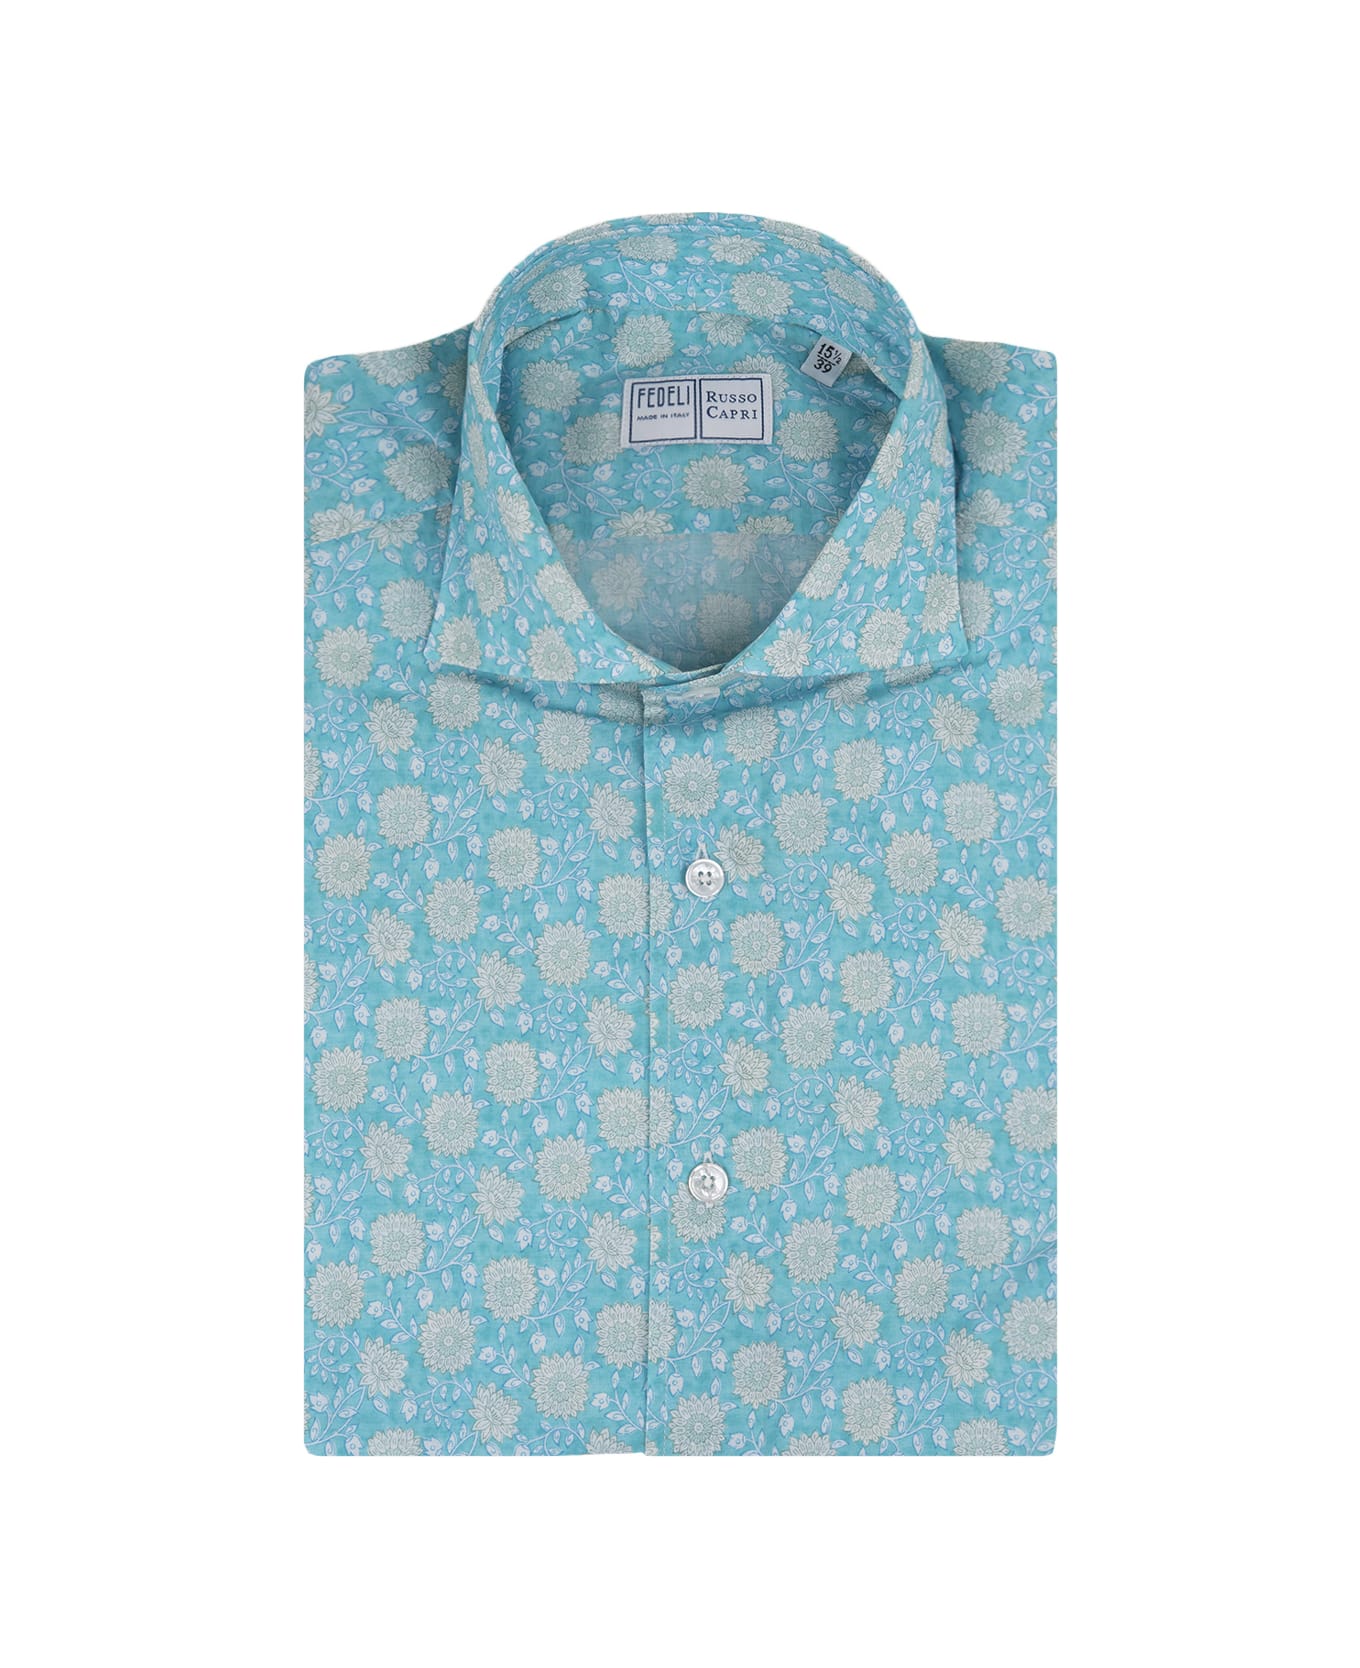 Fedeli Sean Shirt In Turquoise/green Floral Panamino - Blue